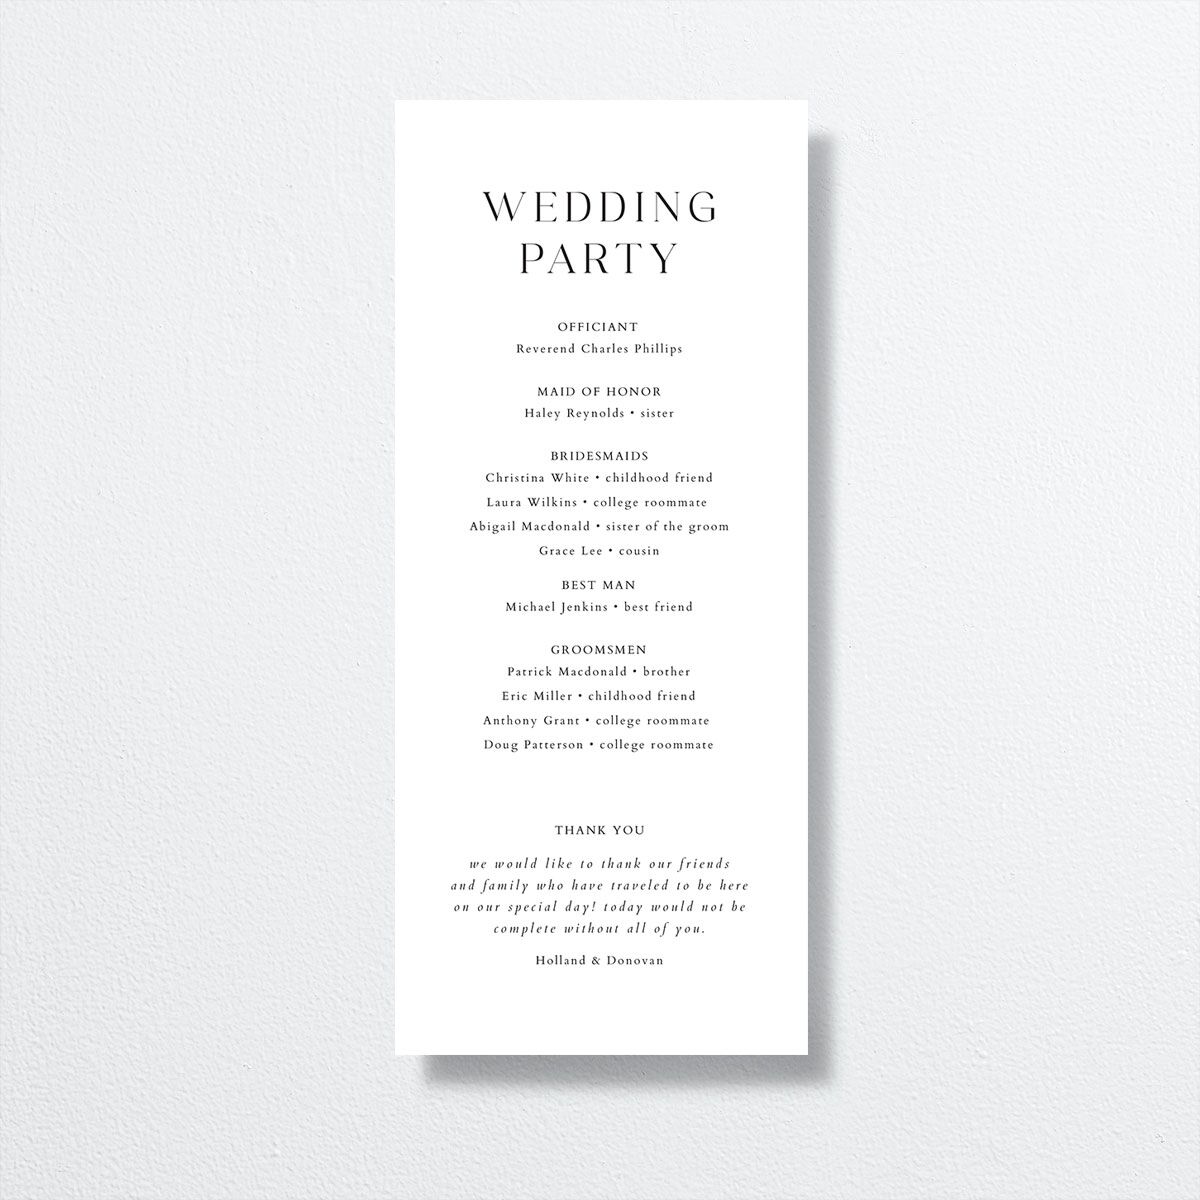 Delicacy Wedding Programs by Vera Wang back in white